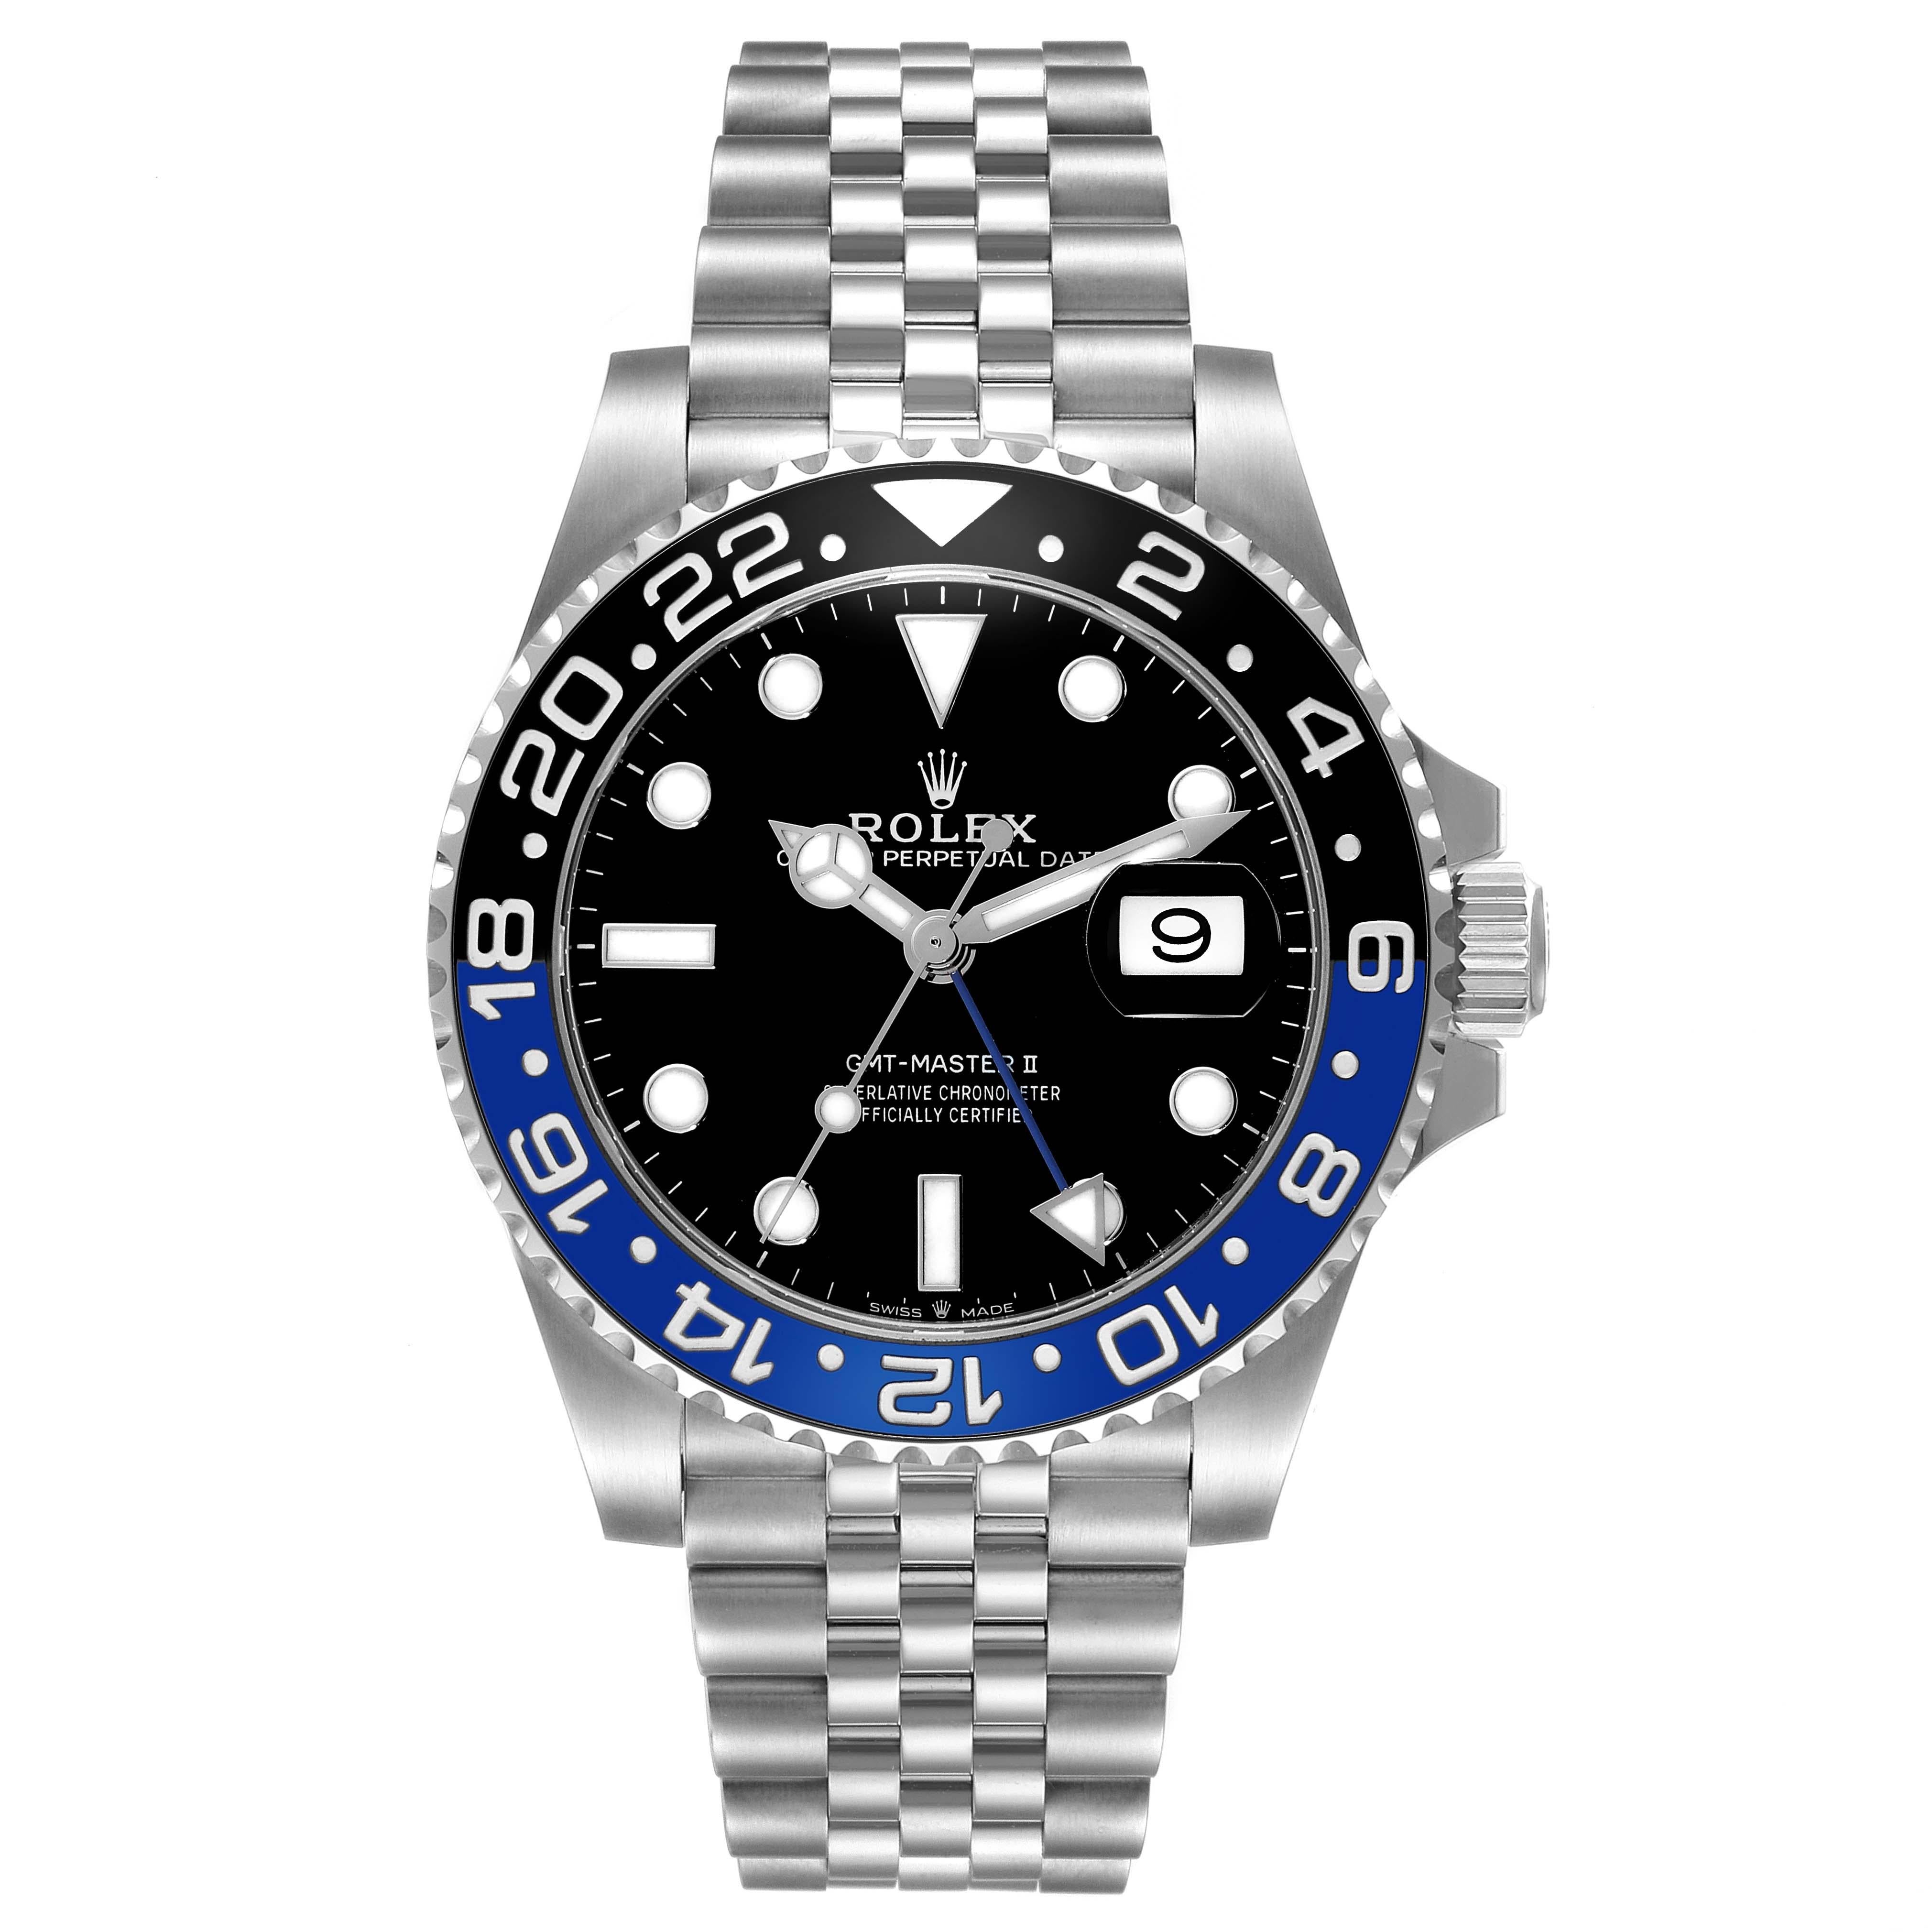 Rolex GMT Master II Batgirl Black Blue Bezel Steel Mens Watch 126710 Box Card. Officially certified chronometer automatic self-winding movement. Stainless steel case 40 mm in diameter. Rolex logo on the crown. Stainless steel bidirectional rotating